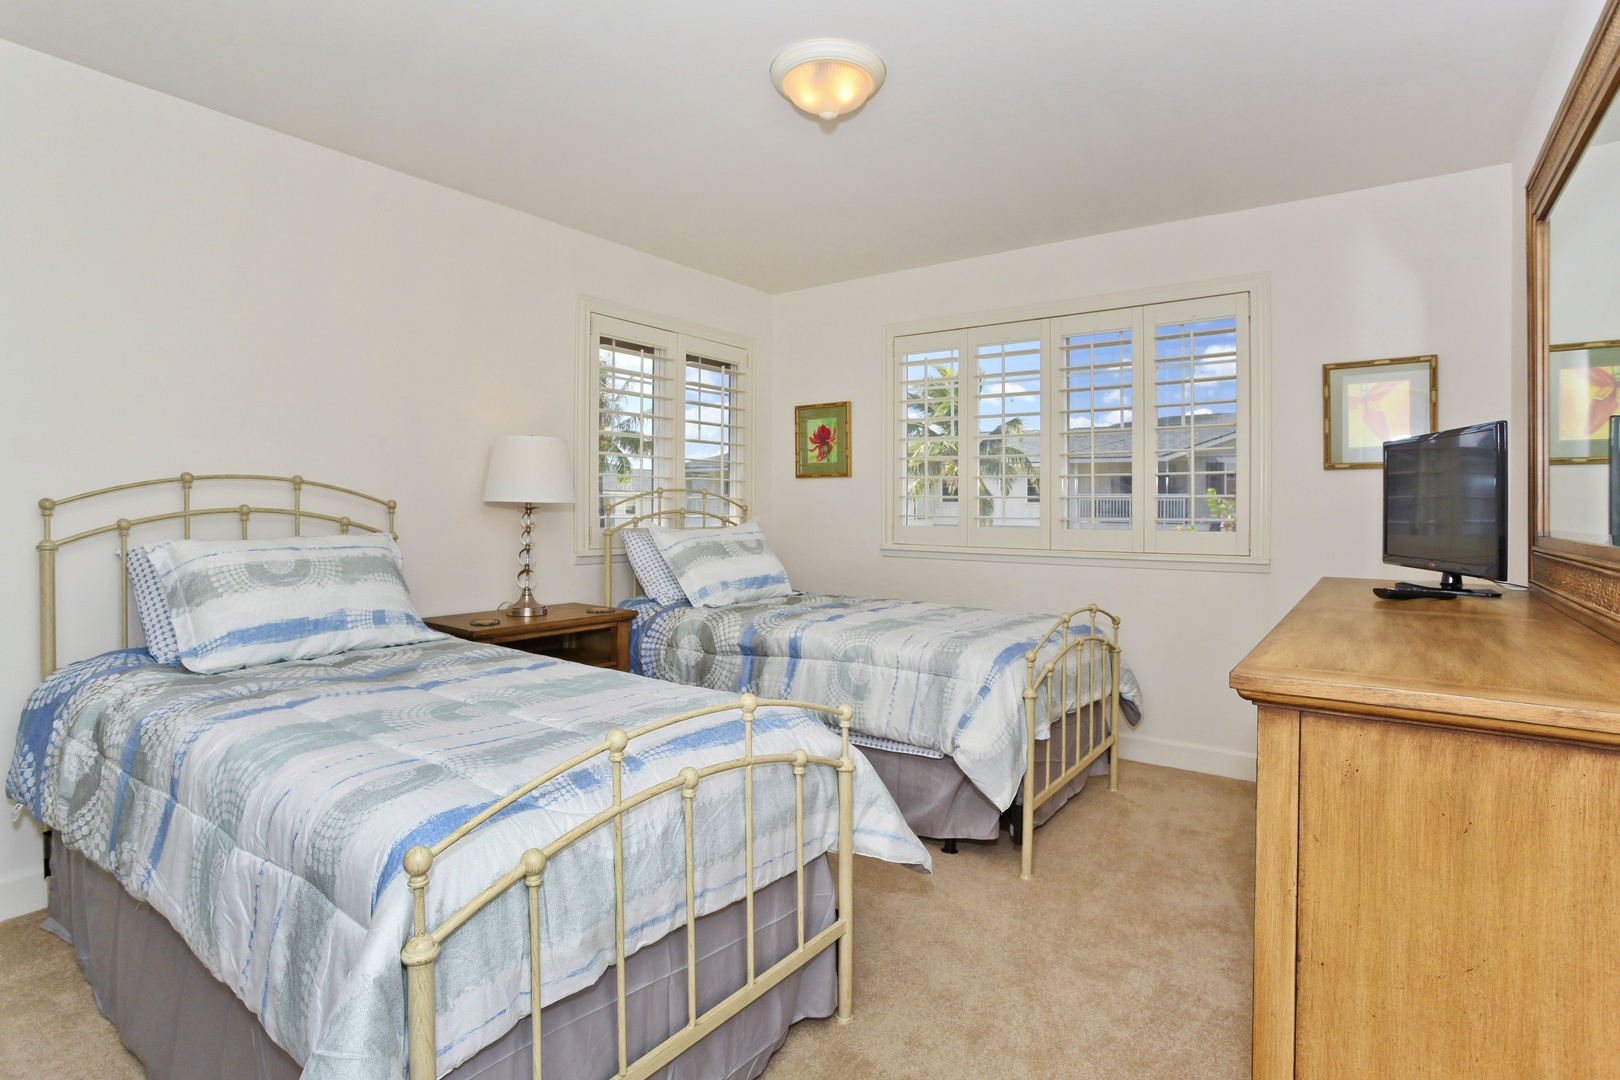 Kapolei Vacation Rentals, Ko Olina Kai Estate #20 - The second guest bedroom with beds and a dresser.